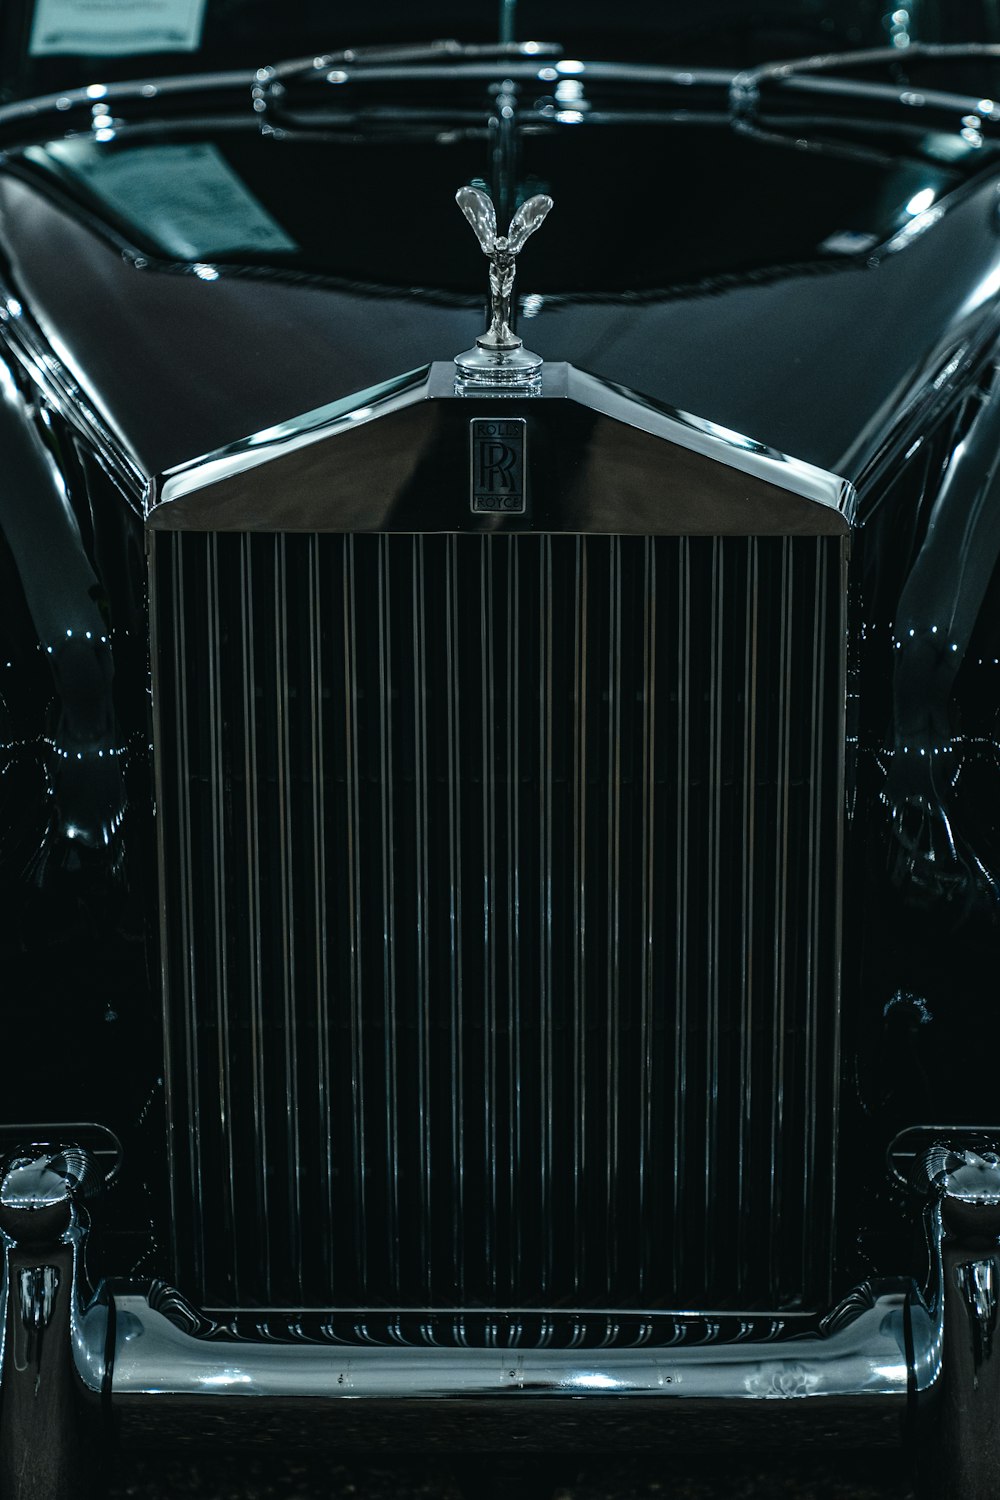 the front end of an old fashioned car